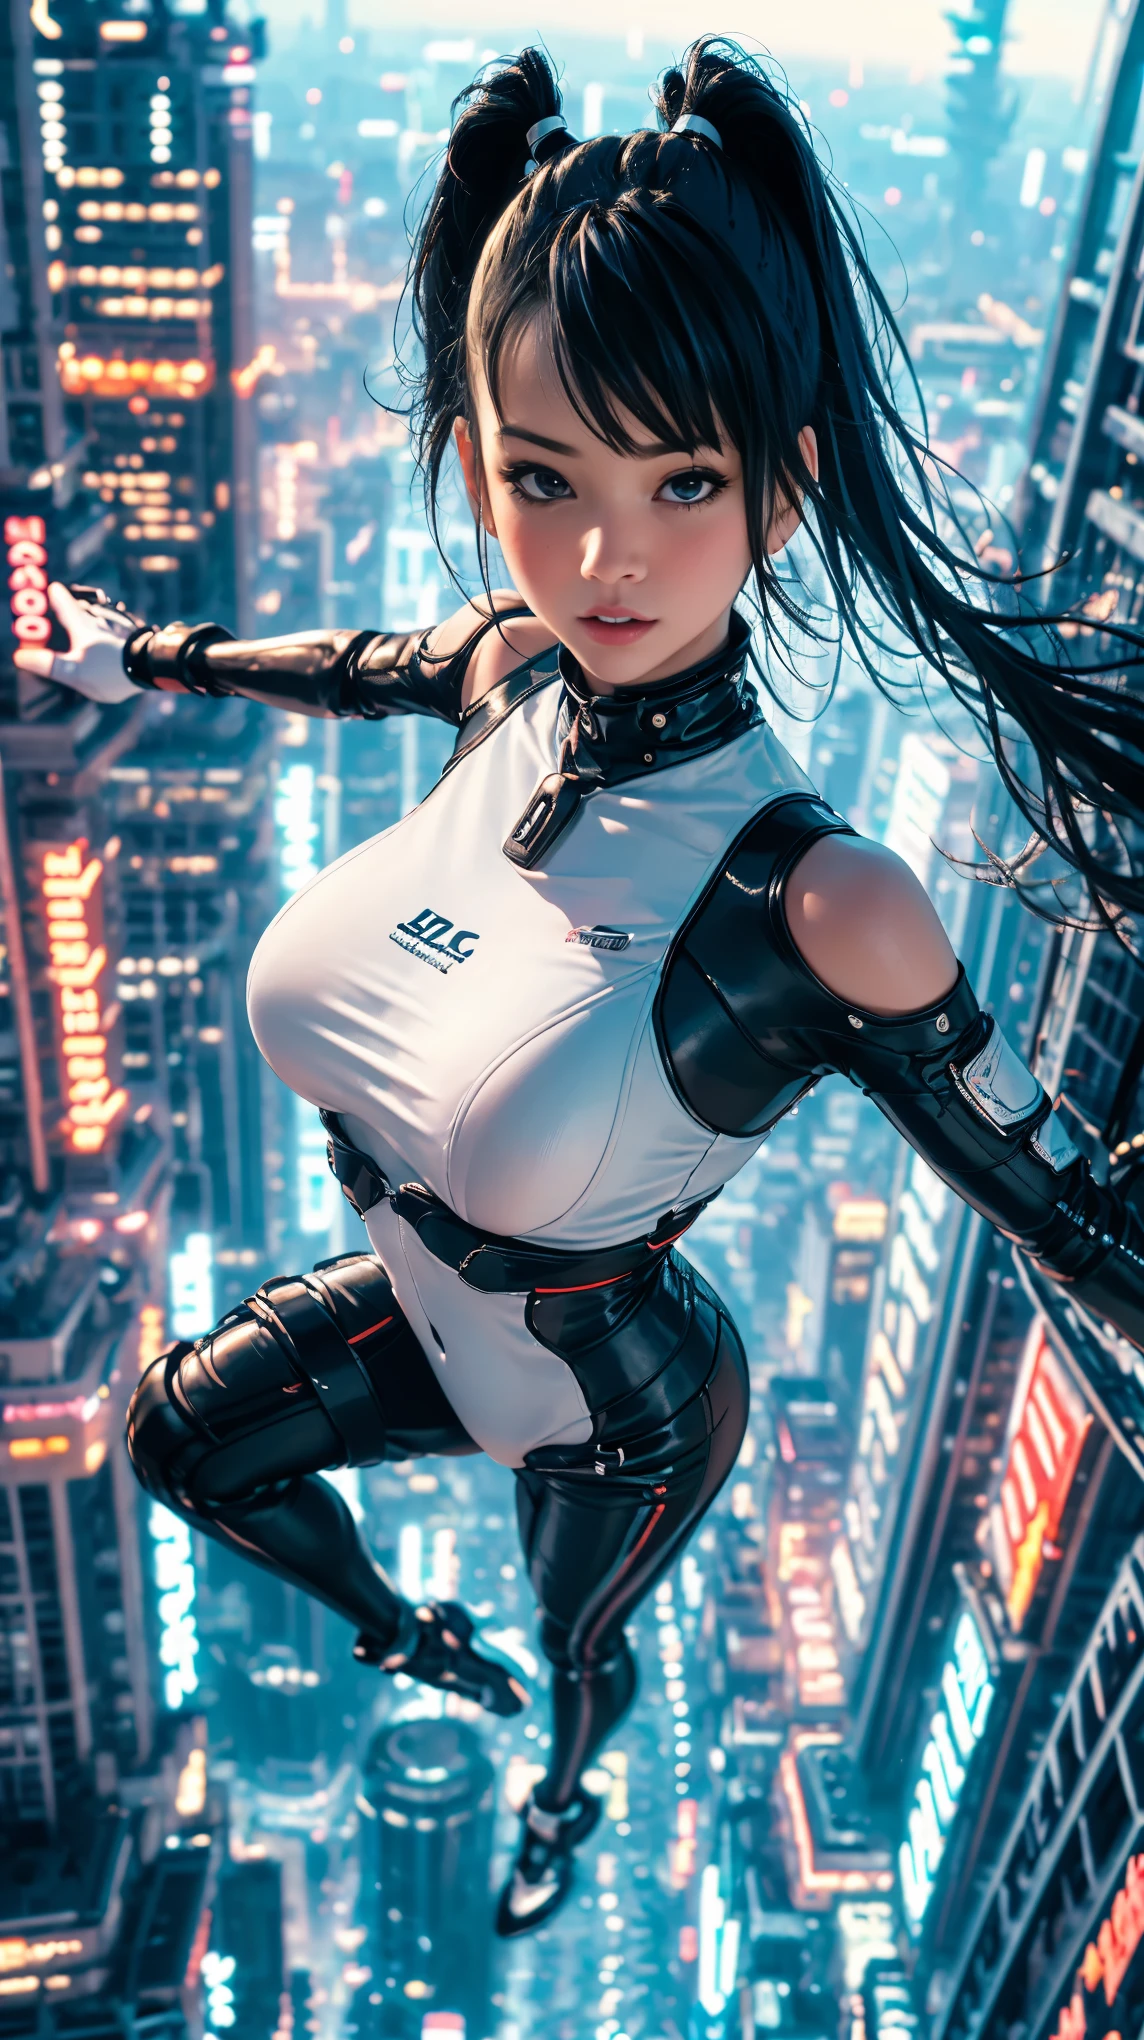 (ultra-detailed, masterpiece:1.2), extremely detailed artwork, best quality, high-resolution, hyper-realistic:1.37, attractive girl, breathtaking leap, background cityscape, realistic lighting, vibrant colors, elegant dress, flowing hair, graceful posture, mesmerizing expression, captivating eyes, delicate facial features, dynamic movement, bustling streets, towering skyscrapers, busy traffic, glowing neon signs, vibrant city life, breathtaking urban scenery, intricate architectural details, vivid city lights, bustling city ambiance, bustling streets, modern cityscape, urban energy